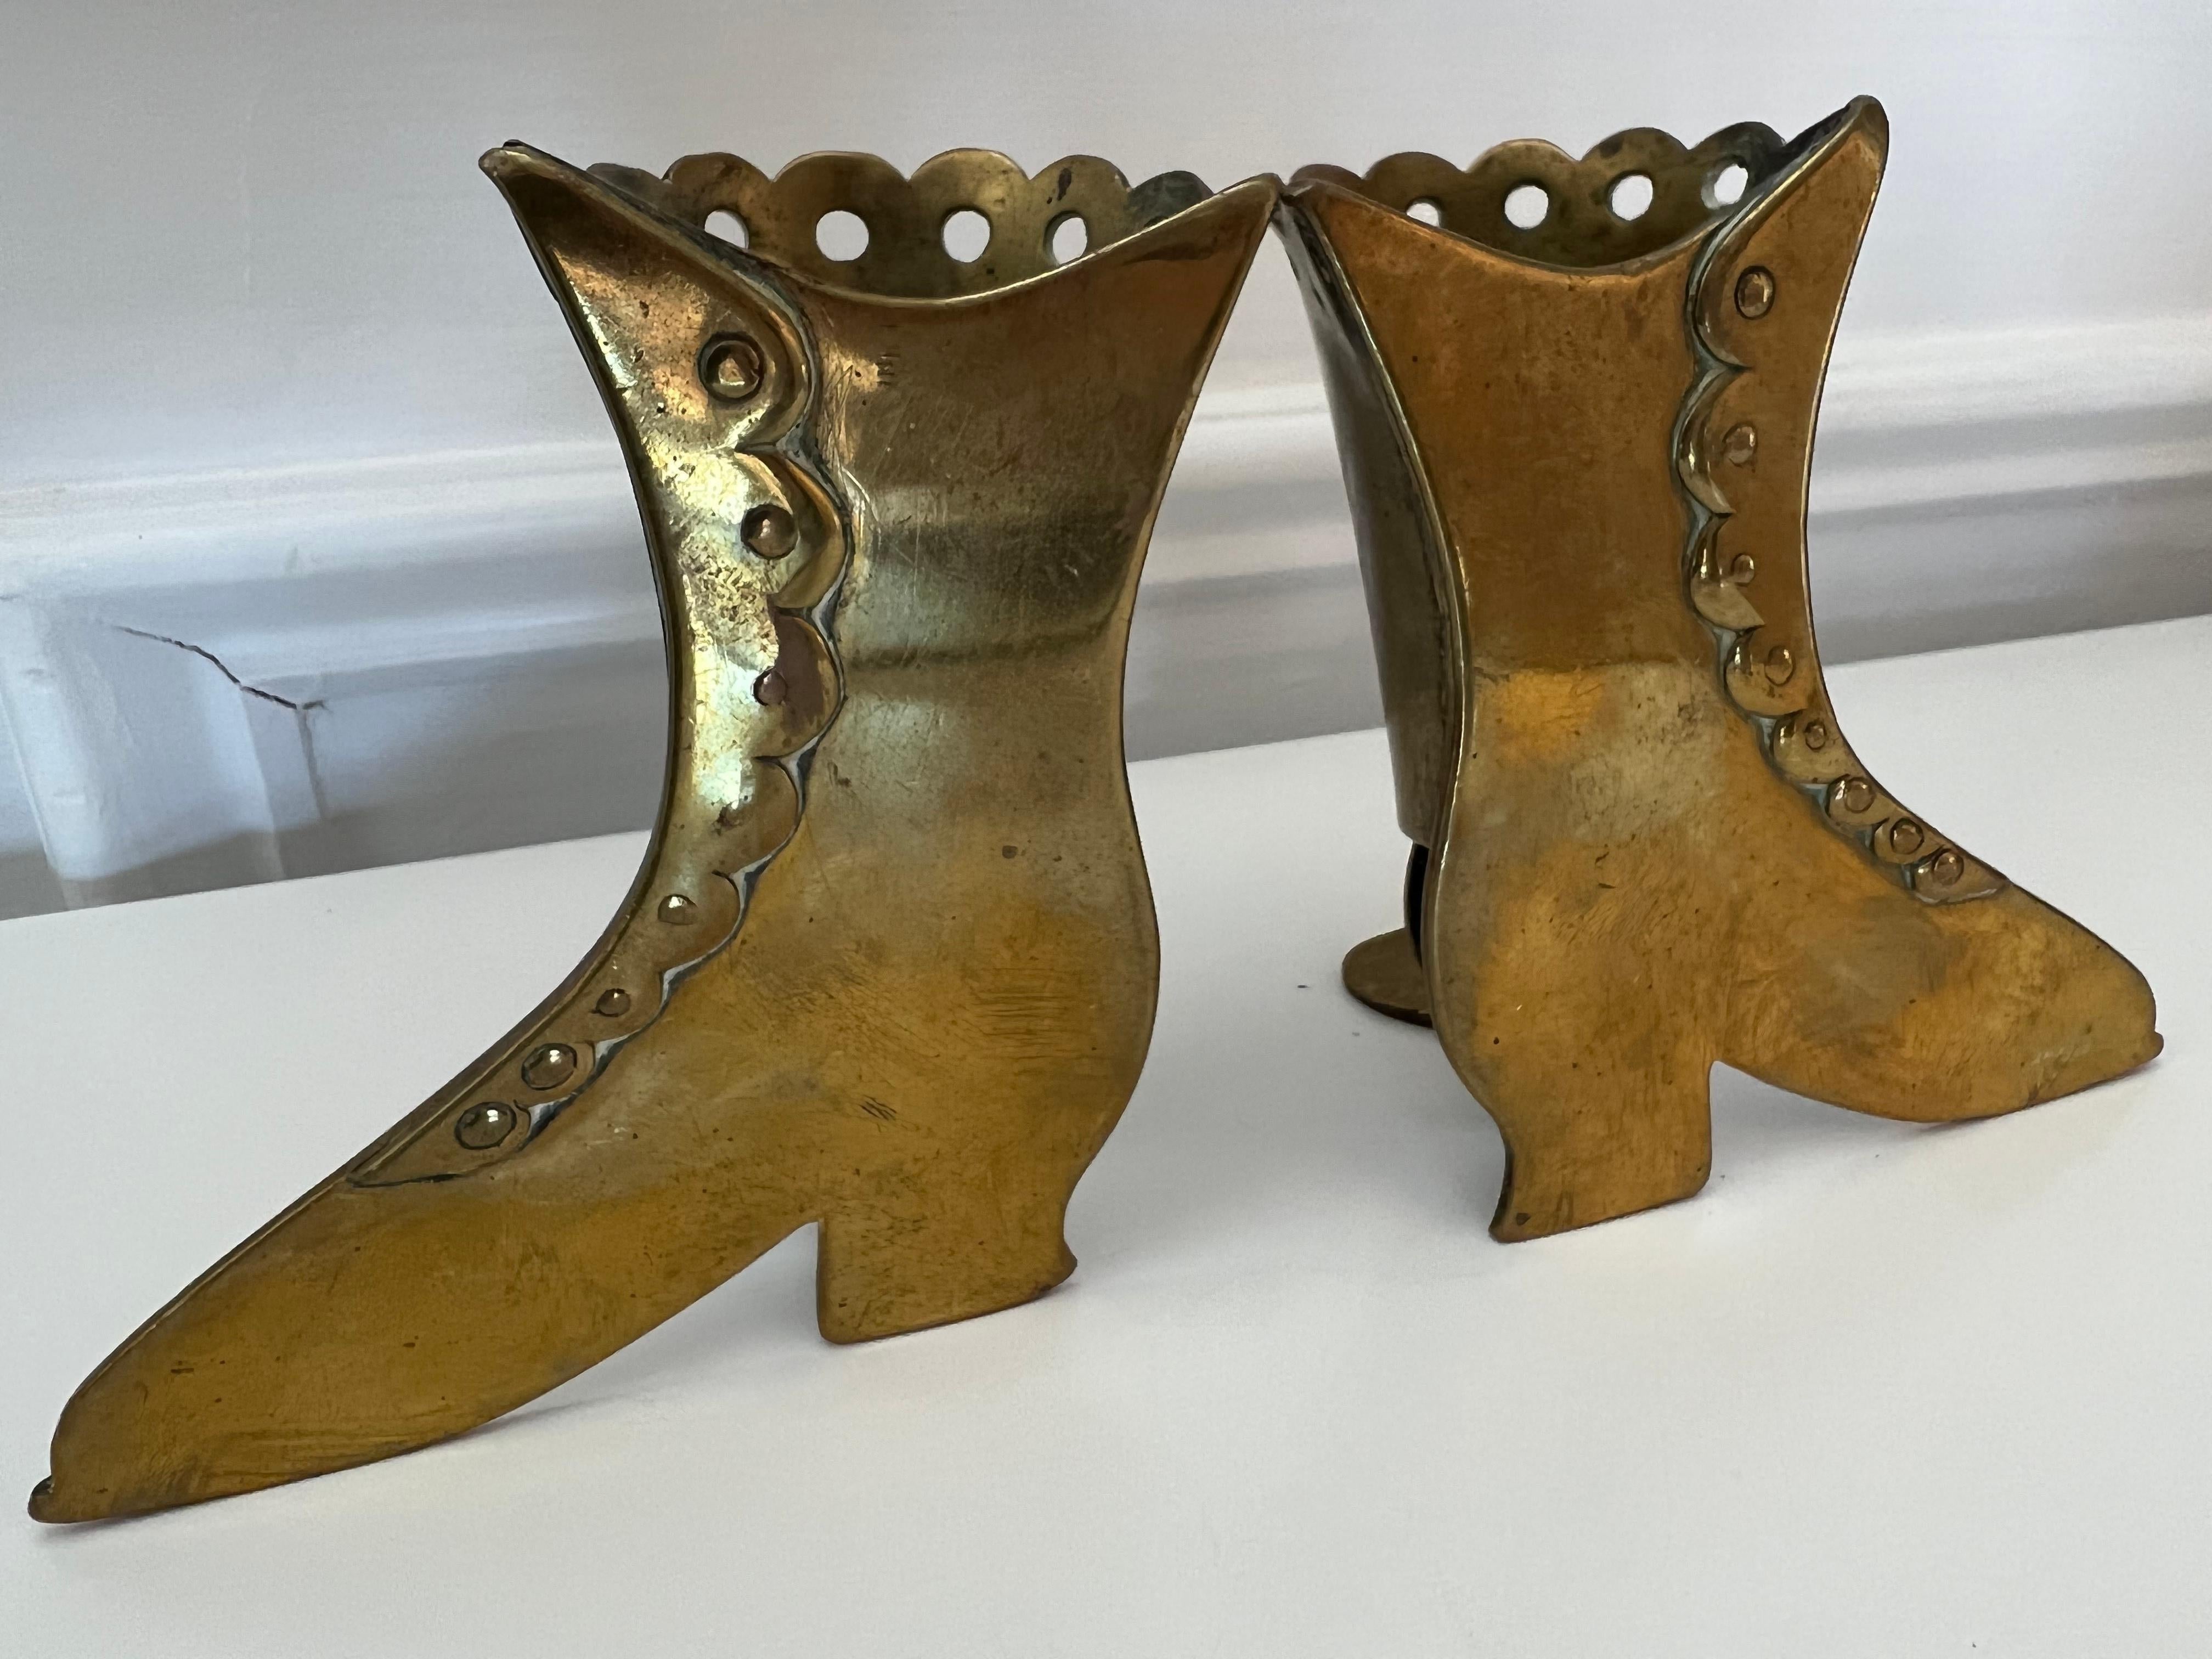 Late 19th century pair of solid brass high top shoe spills-vases with heels and buttons. A nice pair of shoe spills circa 1870 London England. From a private collector who traveled the world buying great pieces.